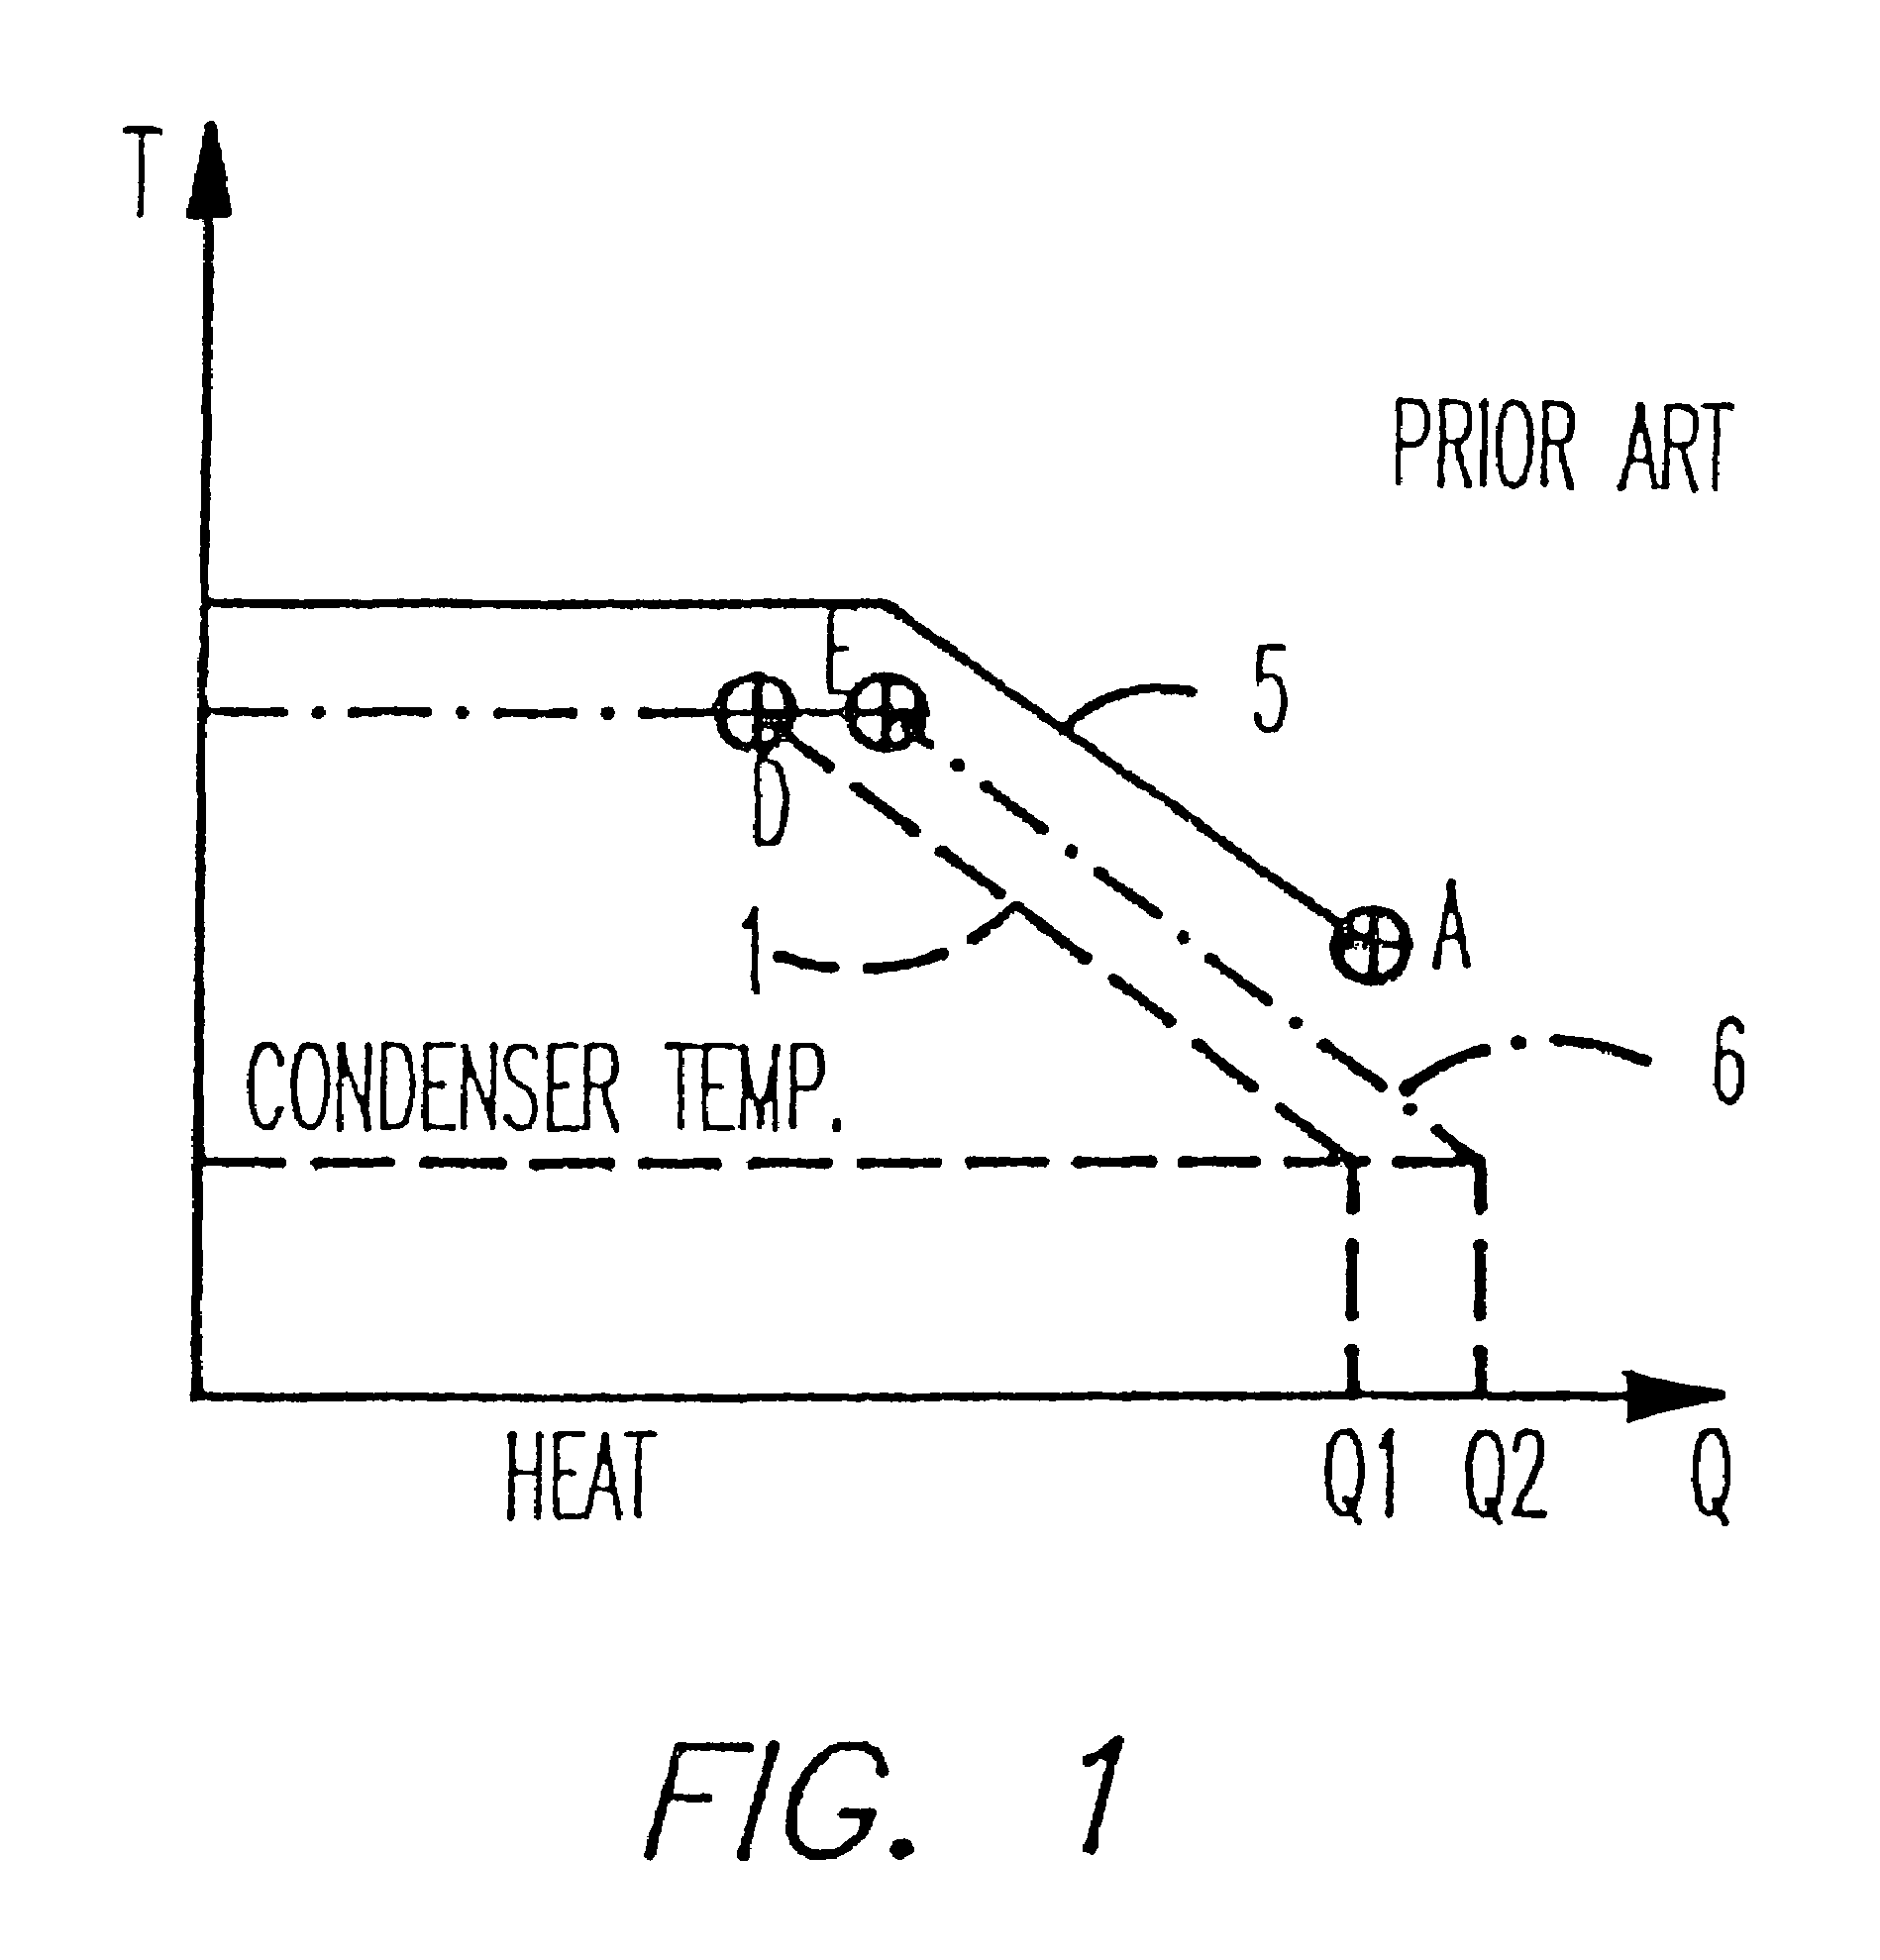 Method and system for producing power from a source of steam